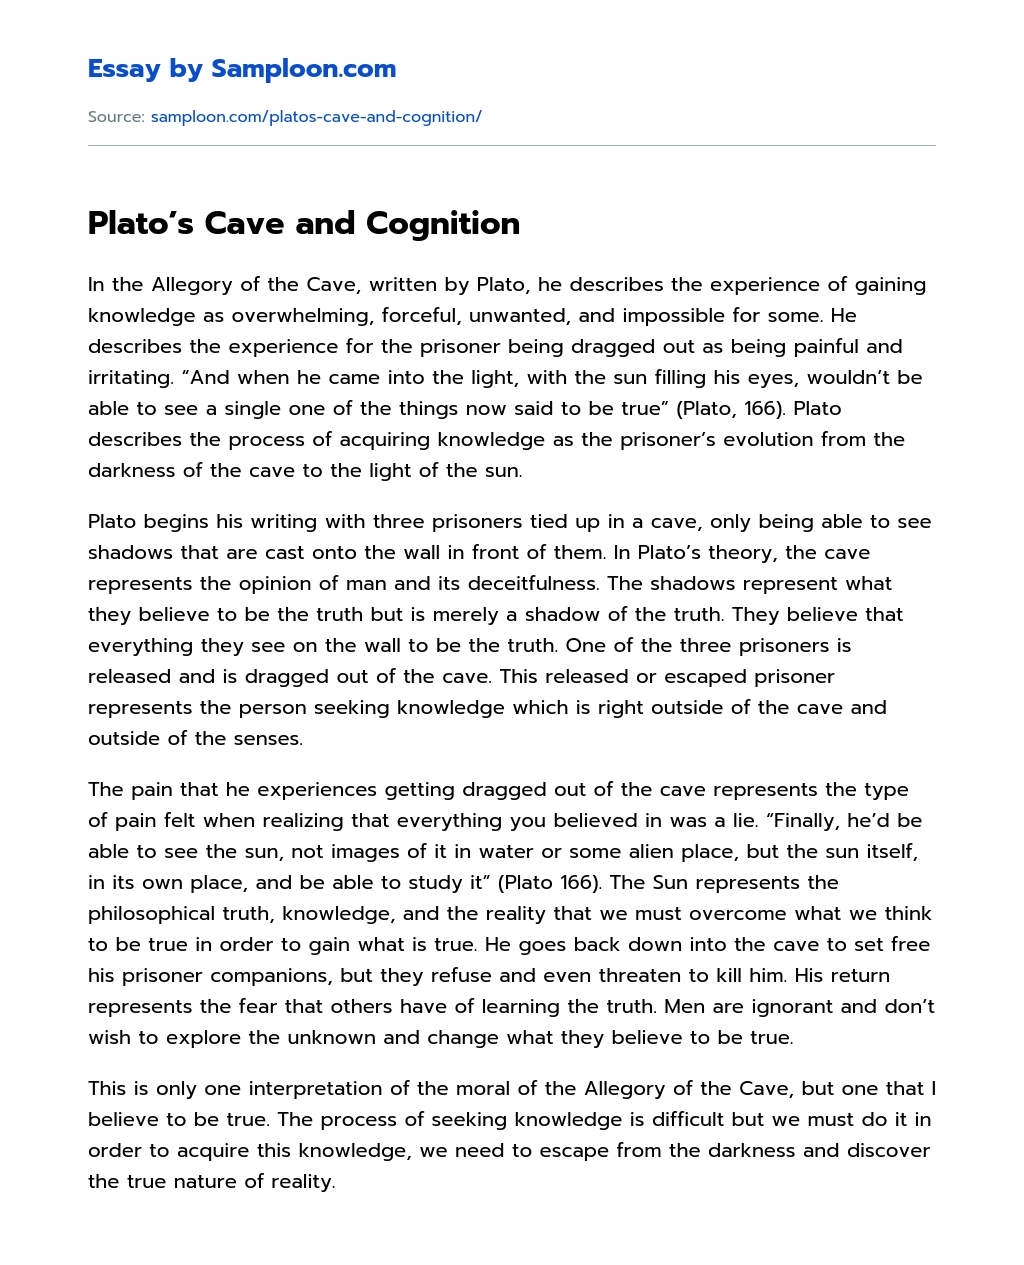 Plato’s Cave and Cognition essay